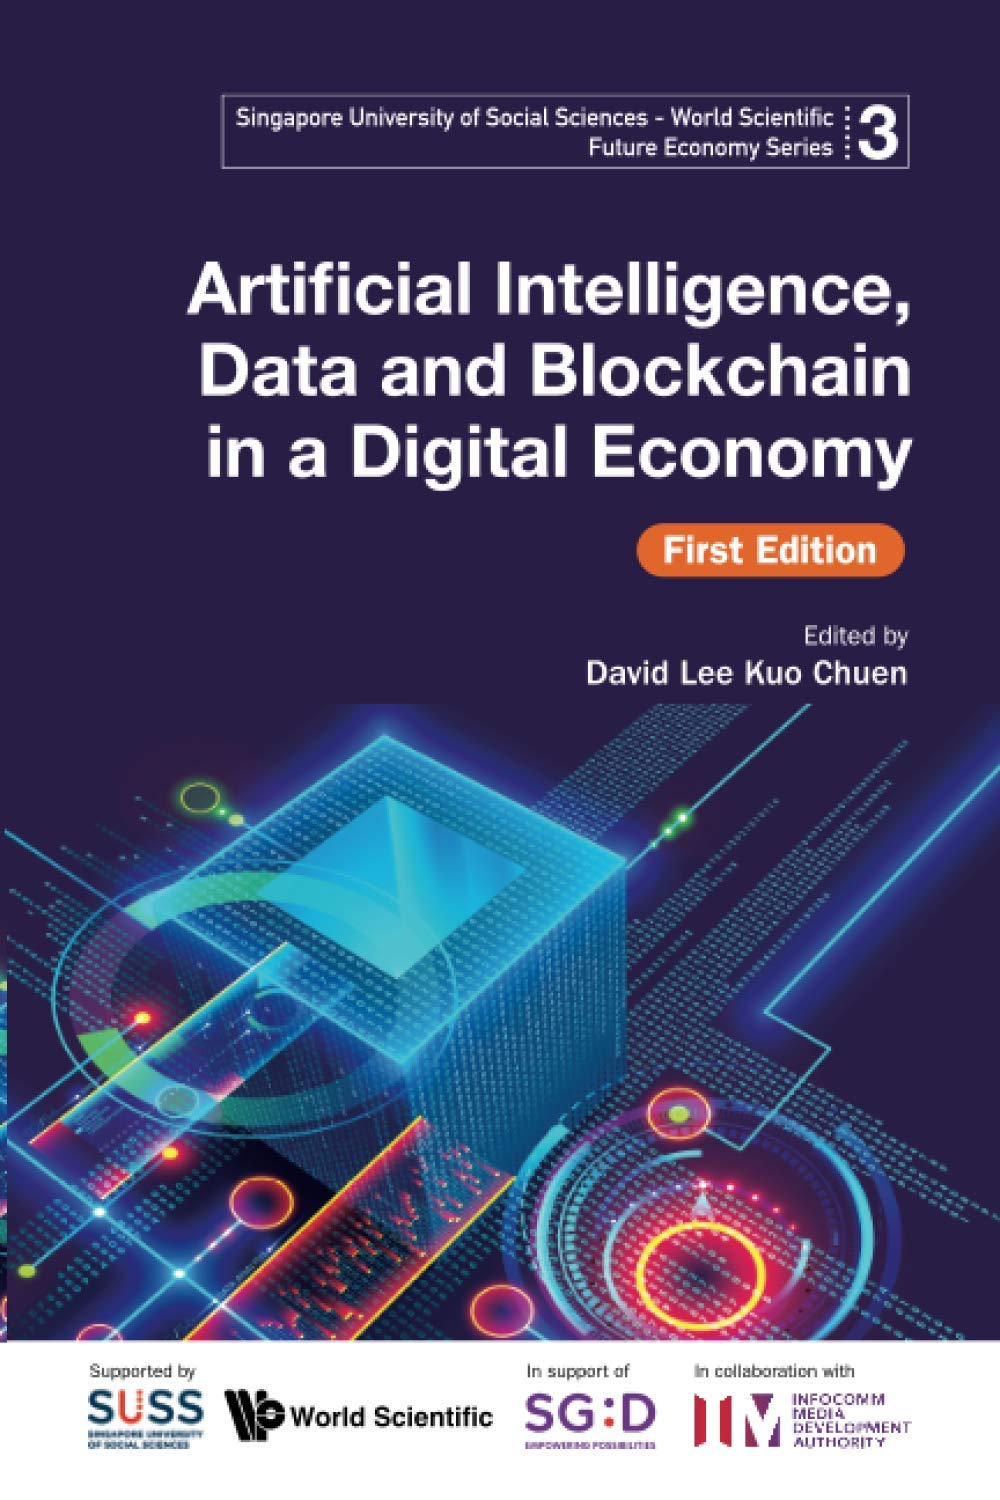 Artificial Intelligence, Data And Blockchain In A Digital Economy, First Edition (Singapore University of Social Sciences - World Scientific F)